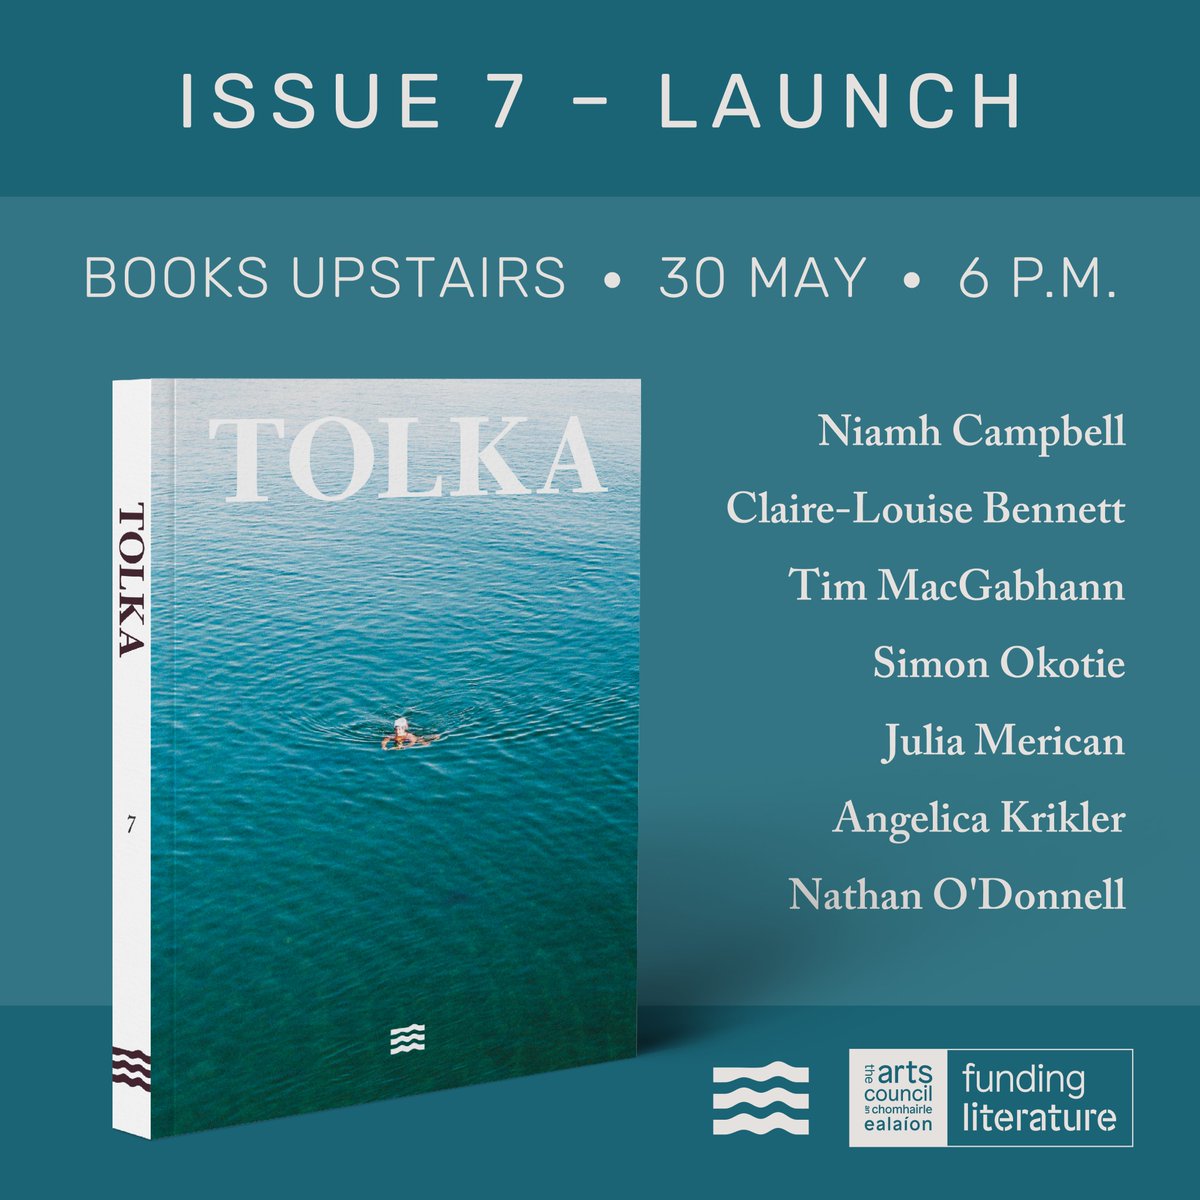 TOLKA Issue Seven launch! We'll be celebrating the publication of Issue Seven @BooksUpstairs on Thursday 30 May at 6pm, with readings from our wonderful contributors. Register for free here: tinyurl.com/r8esvtrs